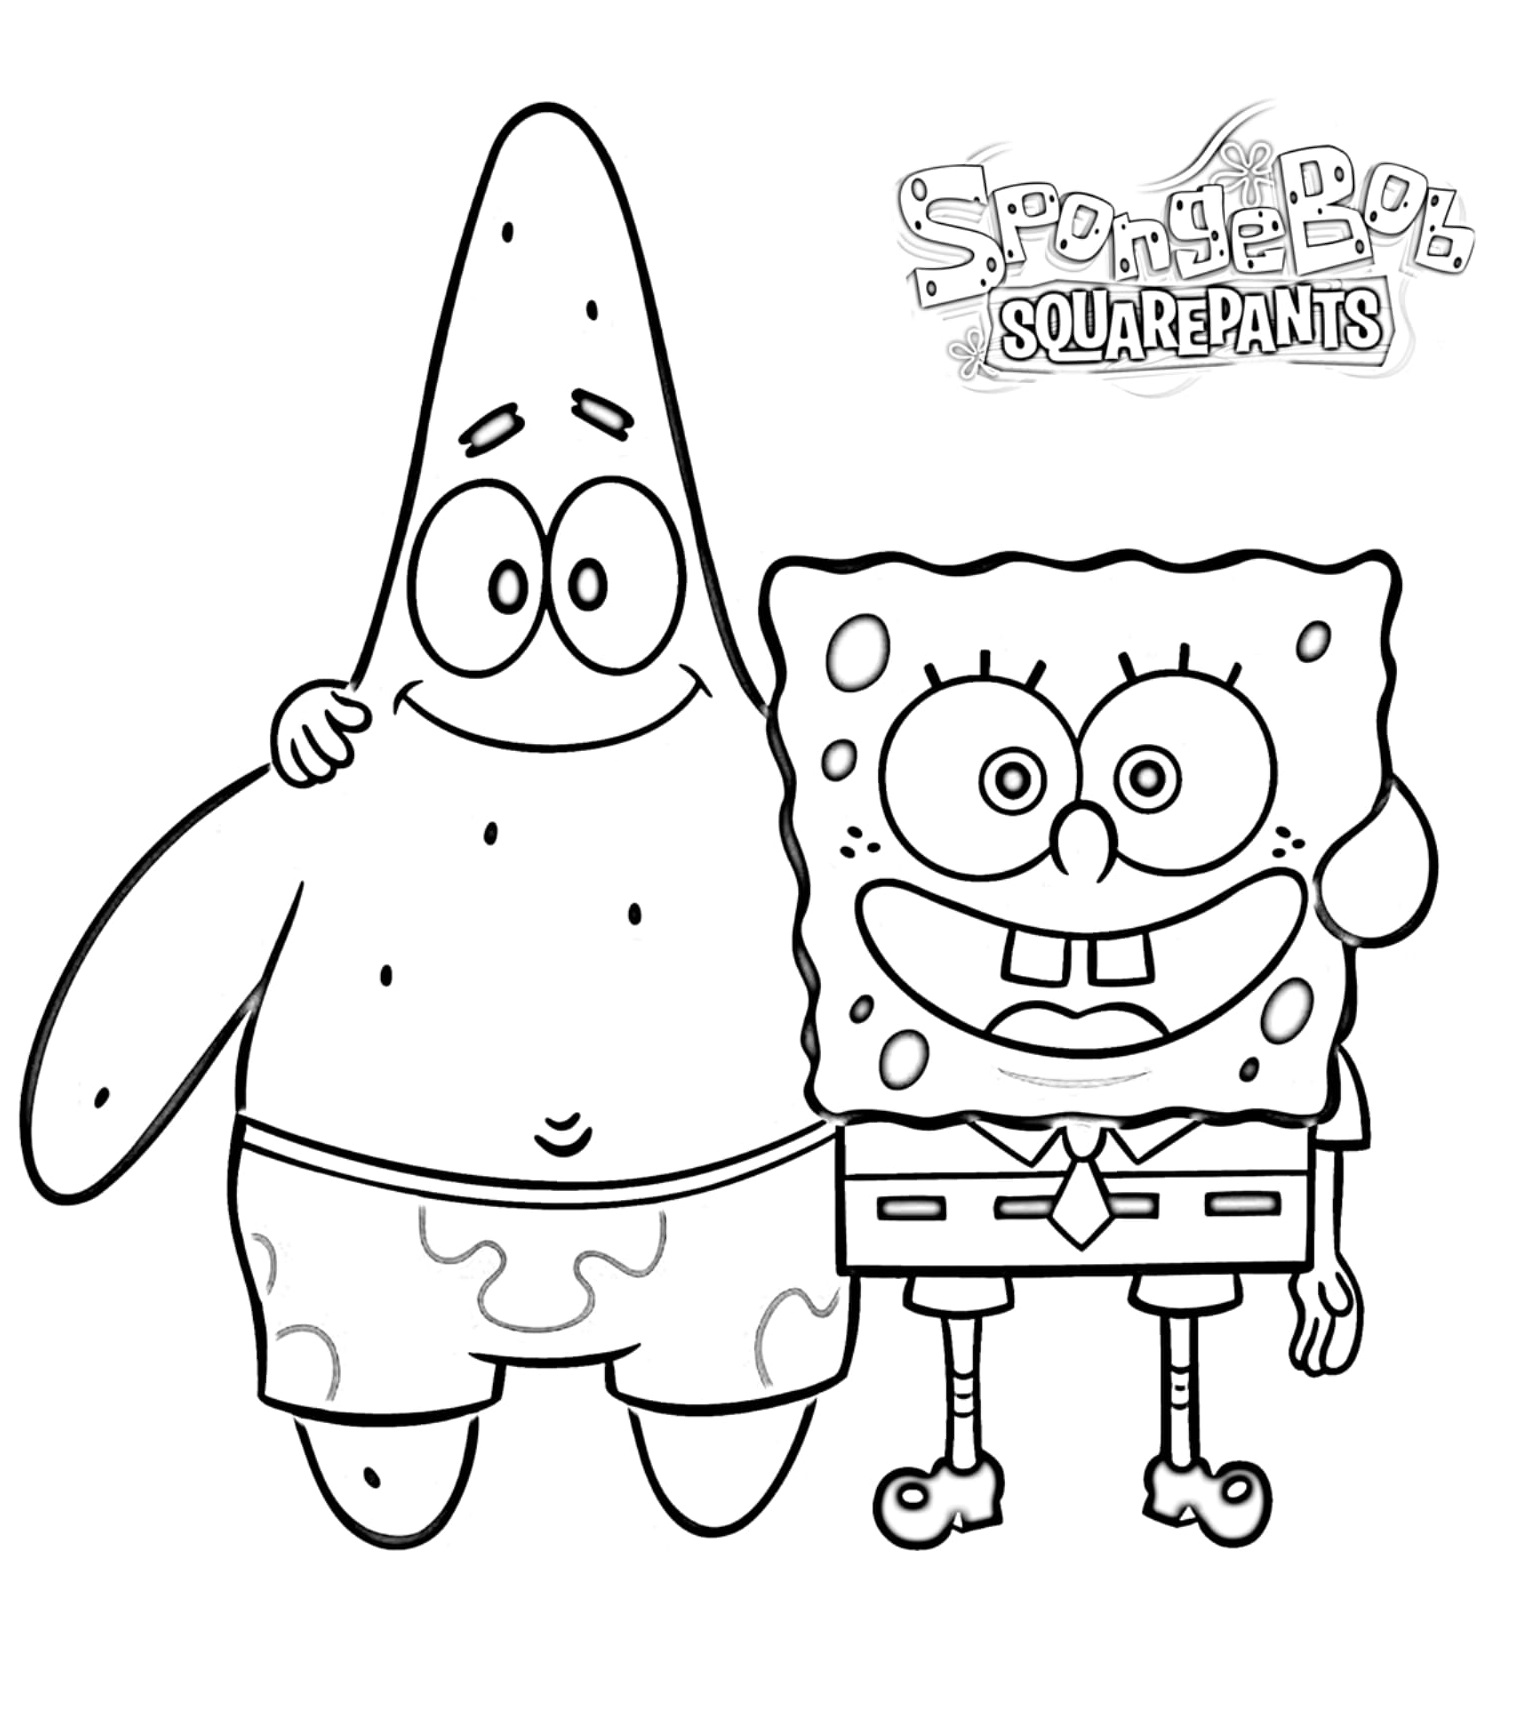 Spongebob And Patrick Friends Coloring Pages   Coloring Cool